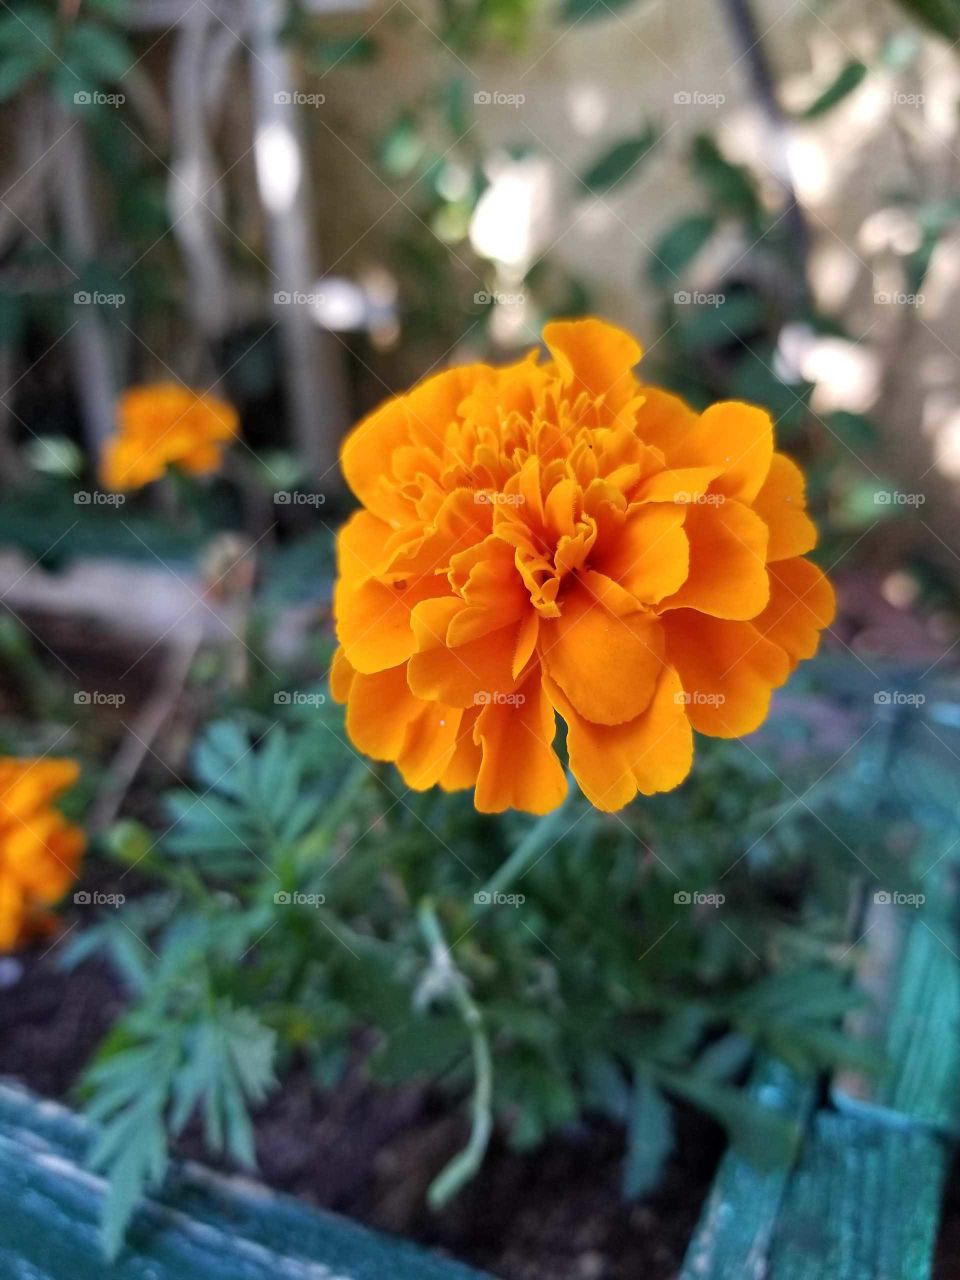 orange flower blooming in summer with blurred background